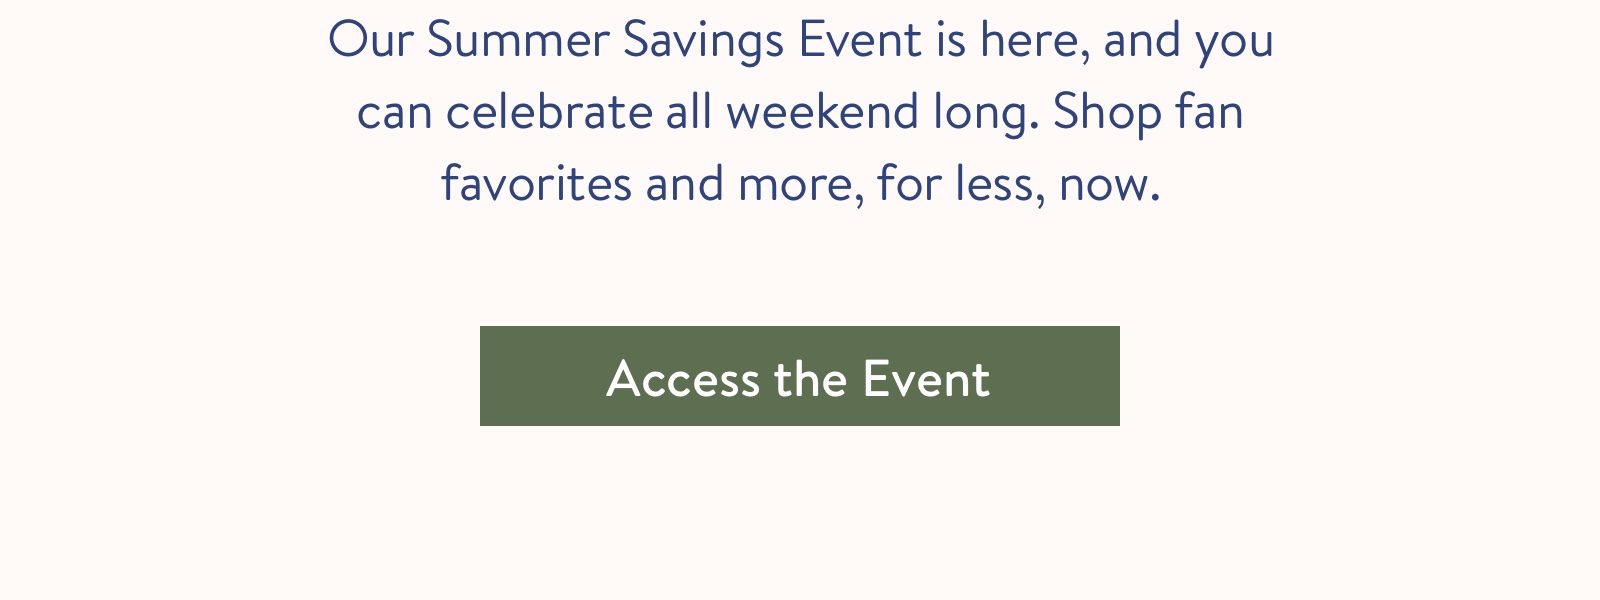 Our Summer Savings Event is here, and you can celebrate all weekend long. Shop fan favorites and more, for less, now.